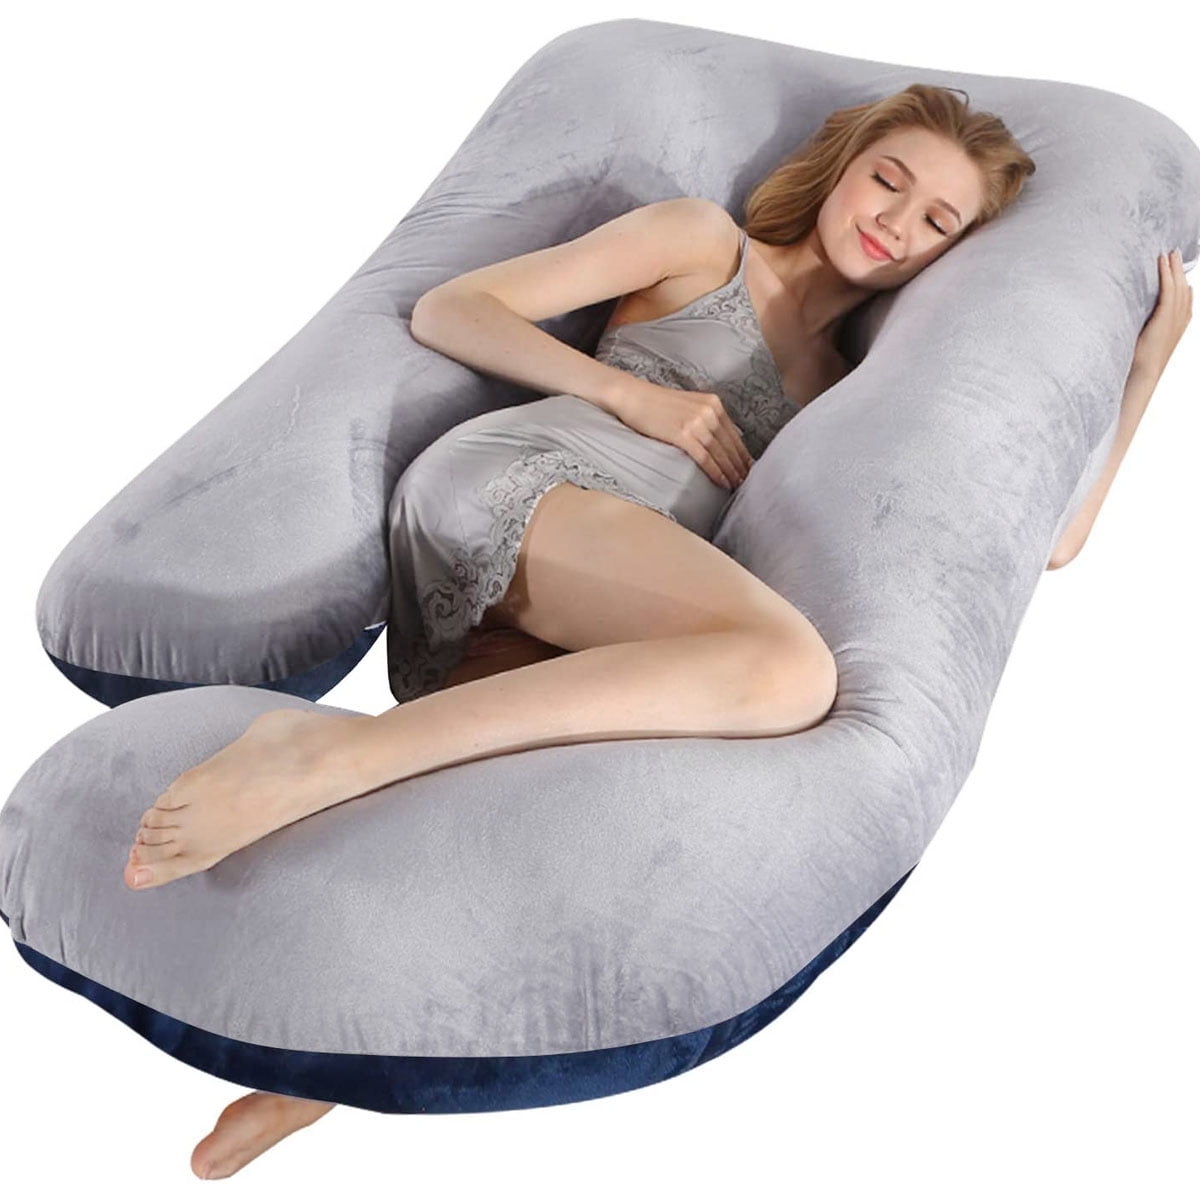 Pregnancy Pillow Maternity Belly Contoured Body C Shape Extra Comfort By Poraty 